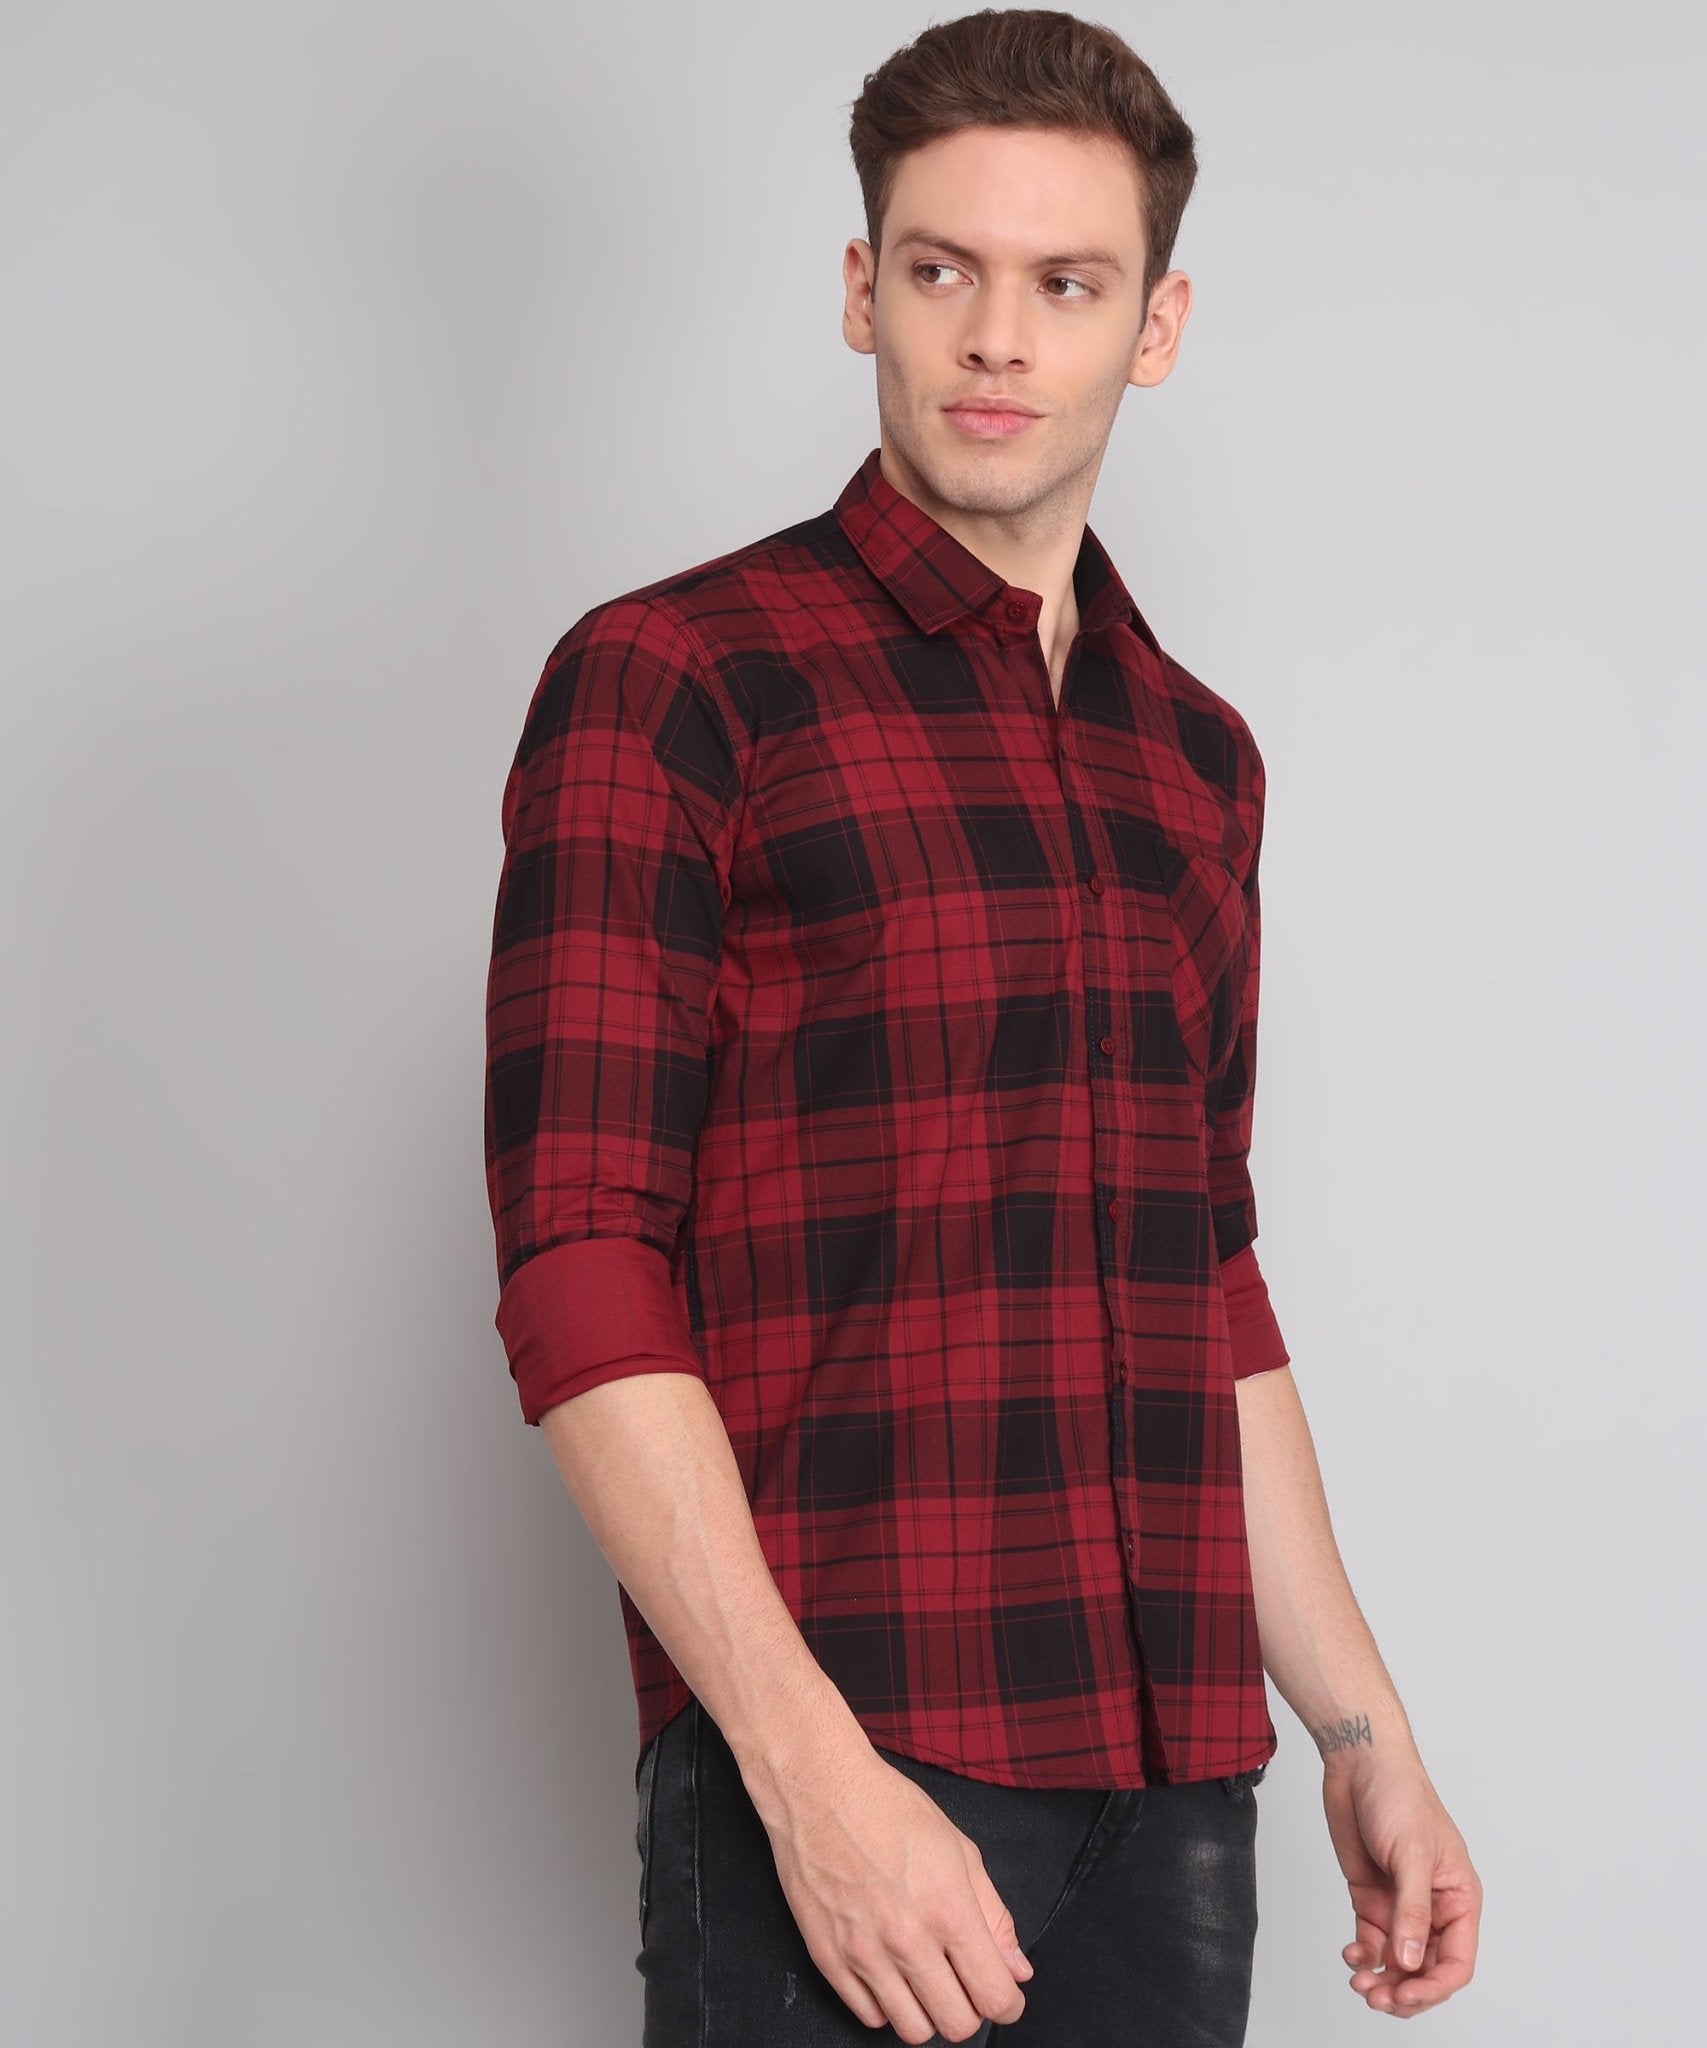 Exclusive TryBuy Premium Black Red Checks Shirt for Men - TryBuy® USA🇺🇸